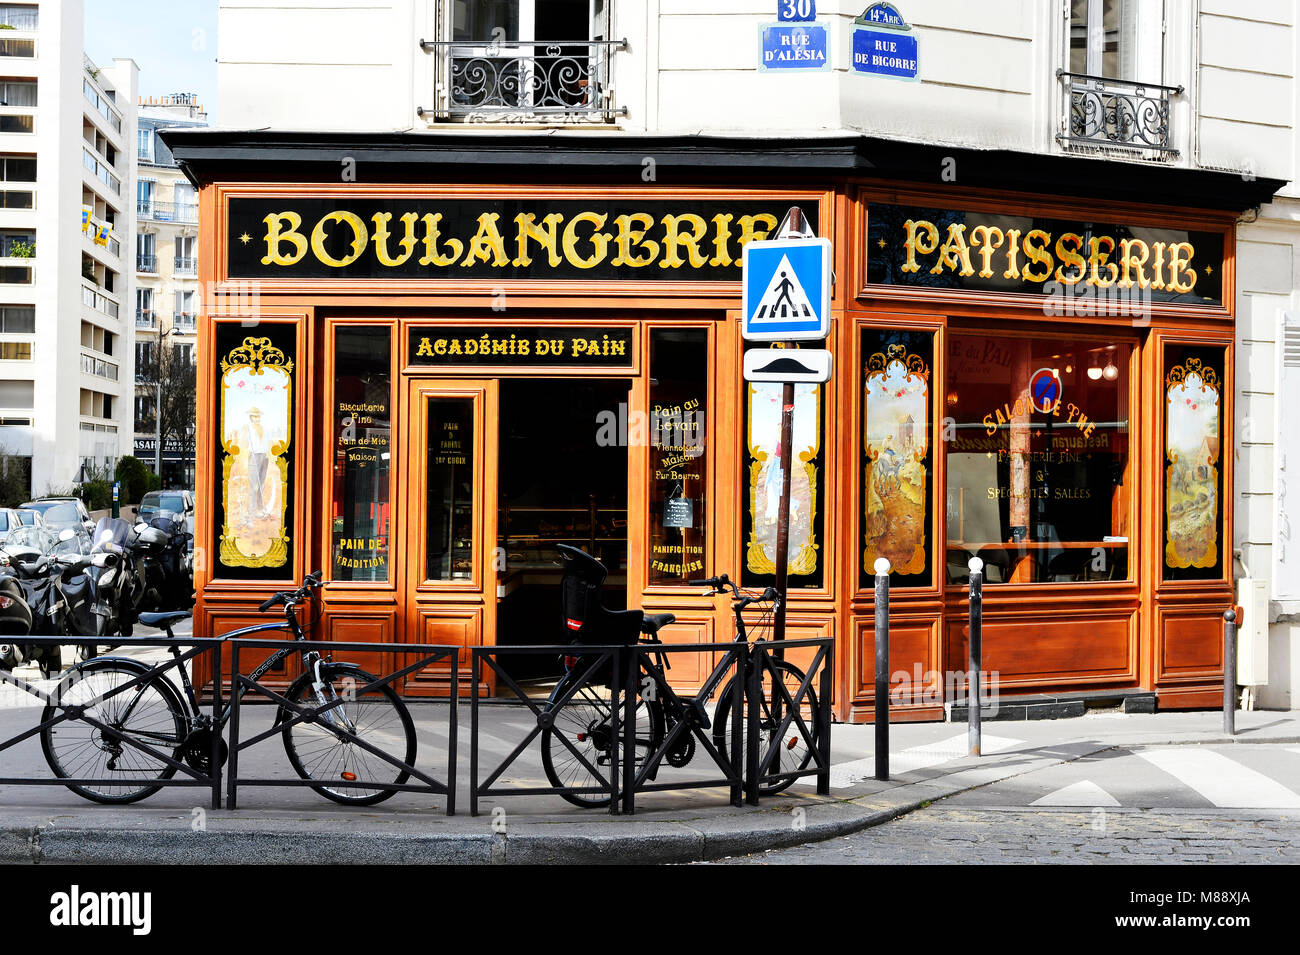 Traditional french bakery - Boulangerie pâtisserie, Paris 14th, France Stock Photo